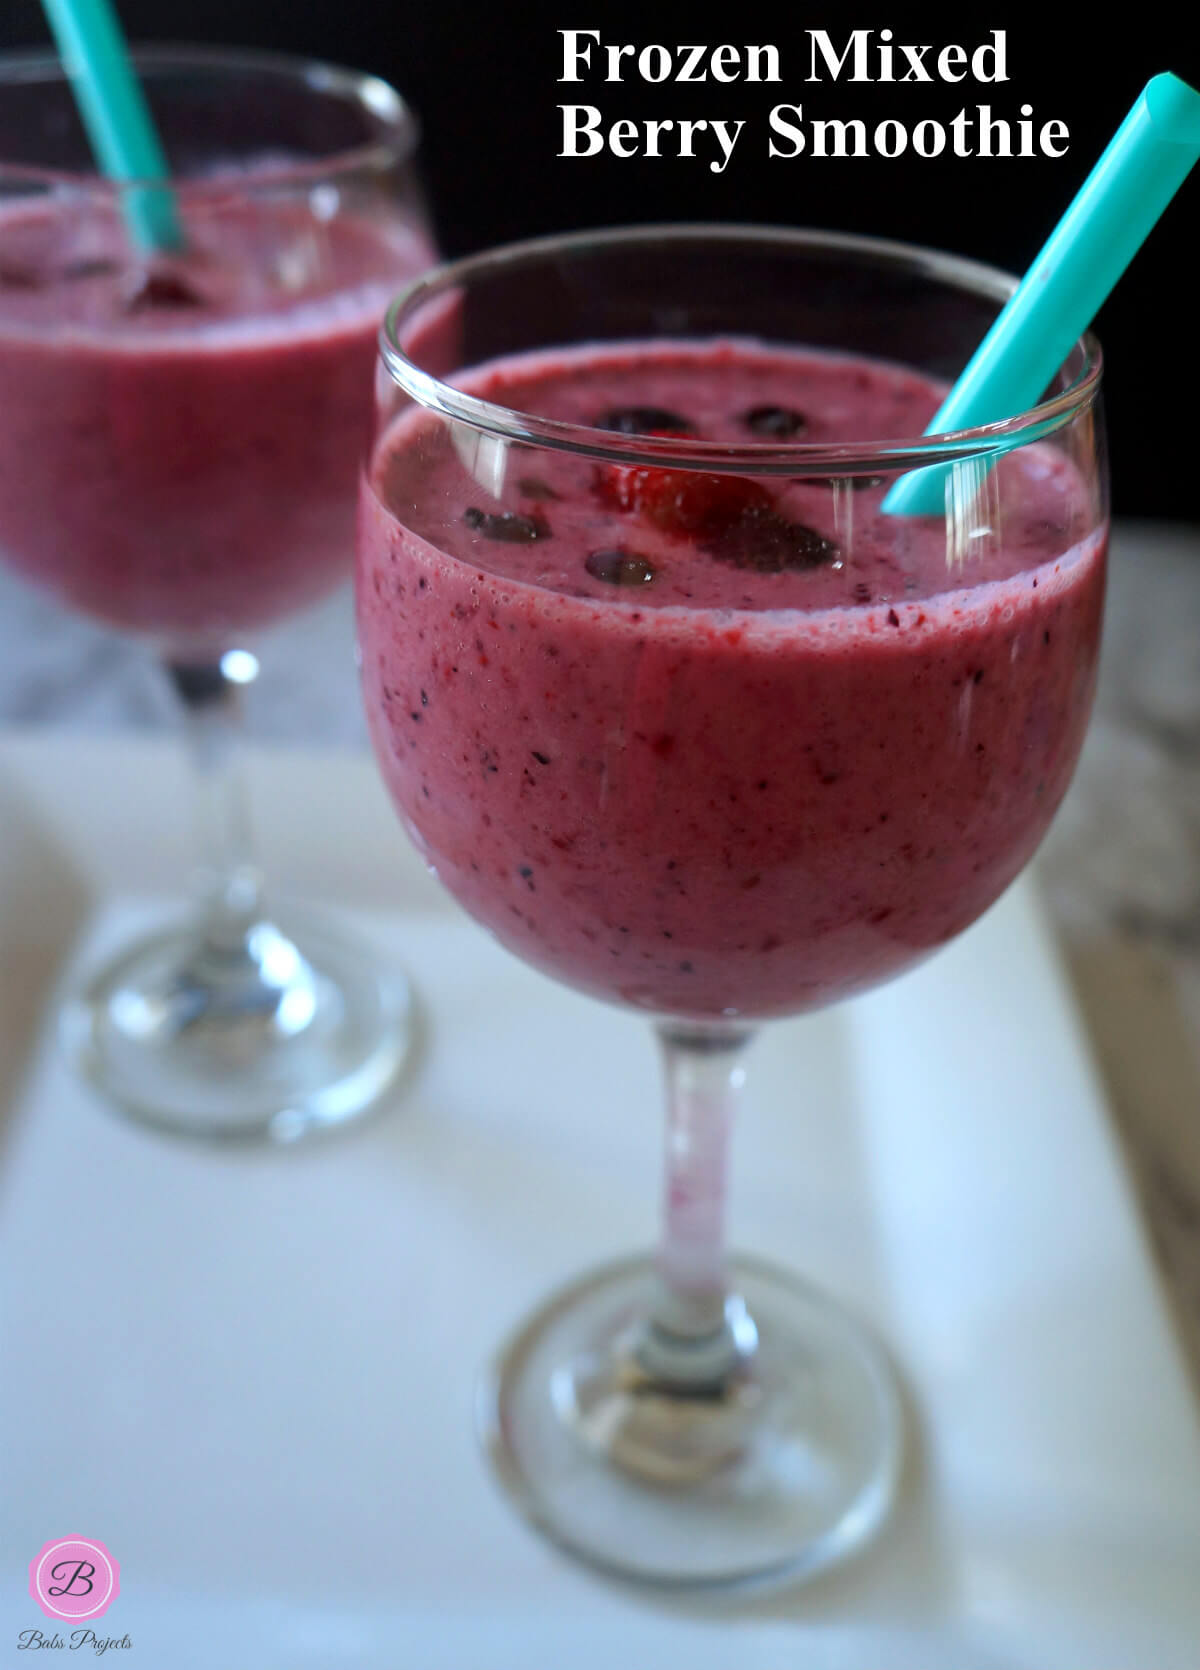 Mixed Berries Smoothies Served in Wine Glasses